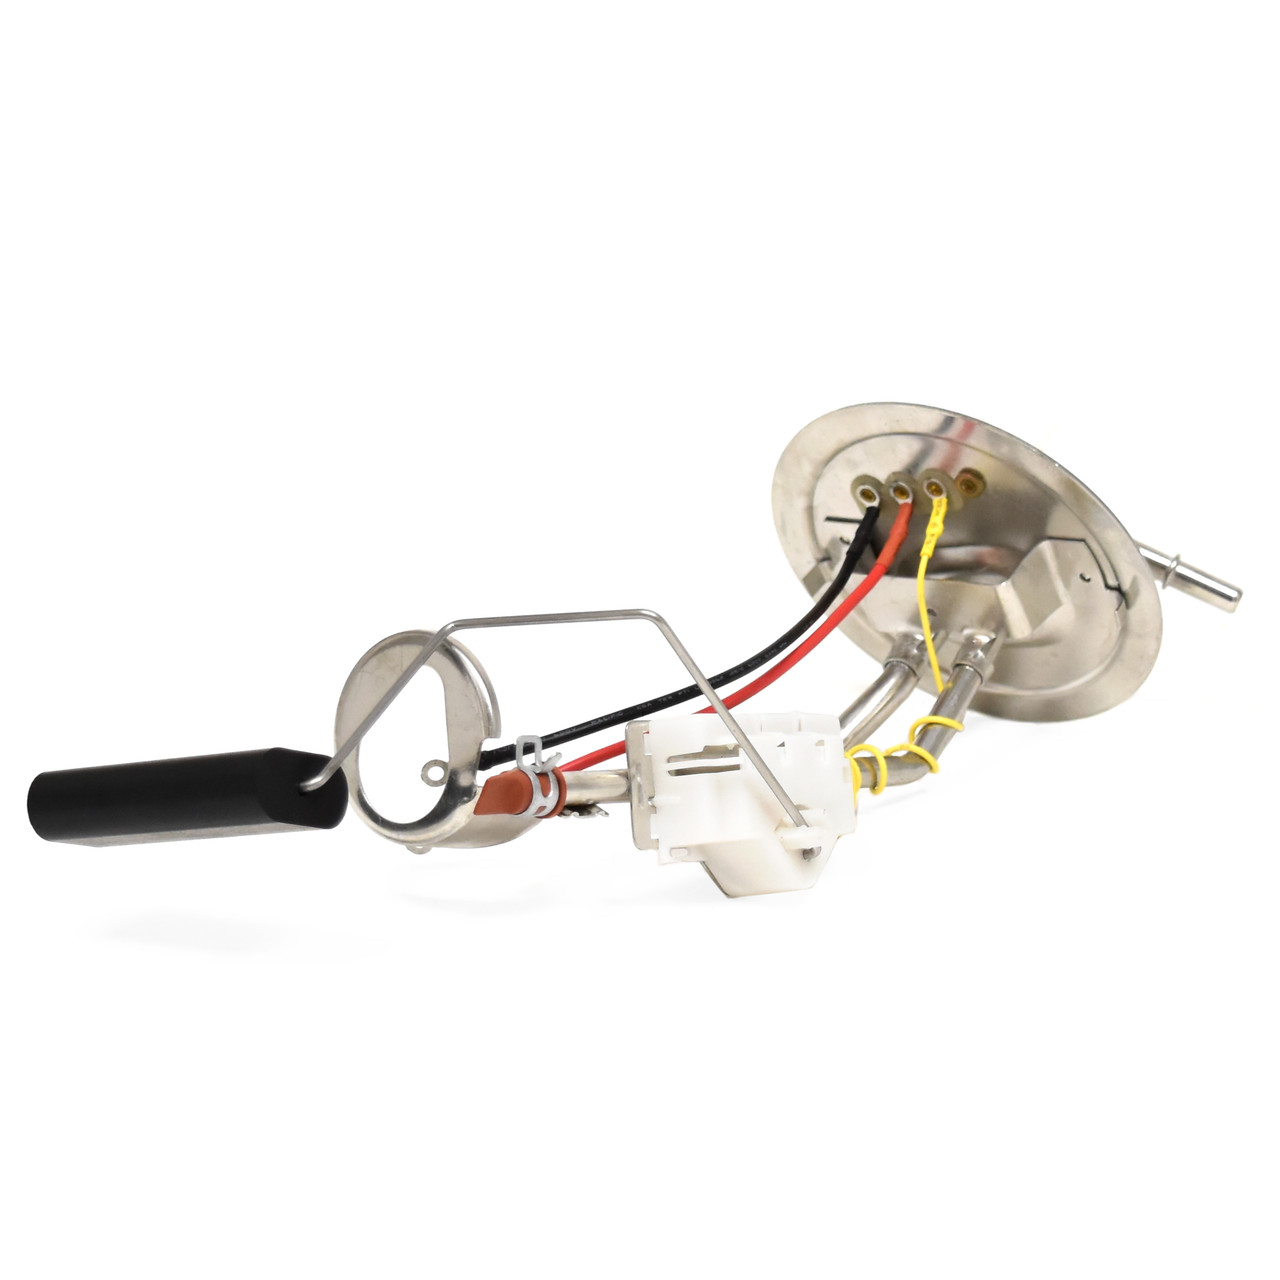 Fuel Sending Unit For EFI With 19 Gallon Rear Mounted Tank 3/8" w/ Return Stainless Steel [FP-FSU85]